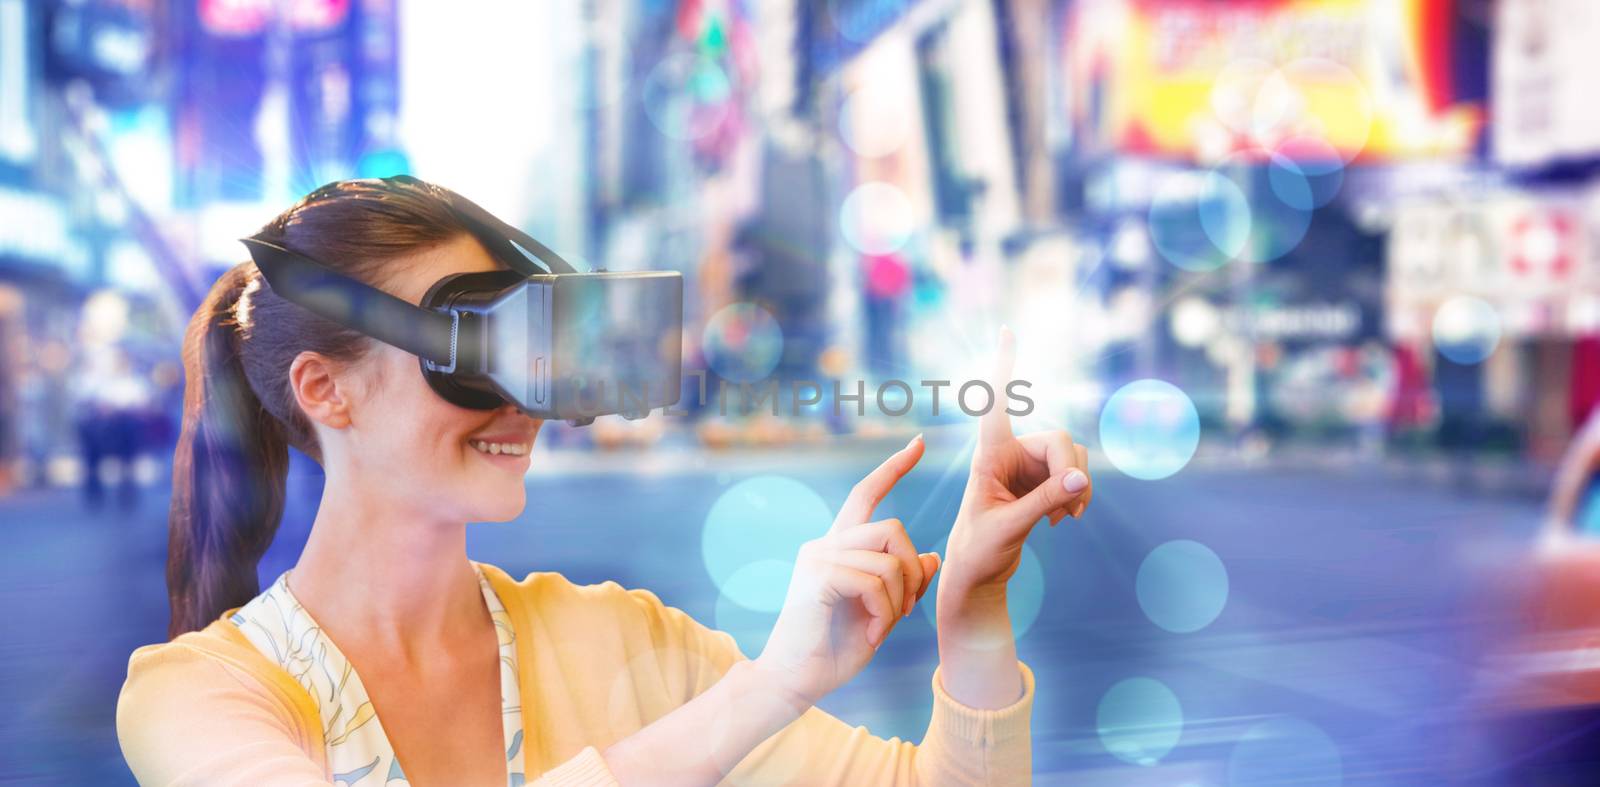 Woman using a virtual reality device against blurry new york street